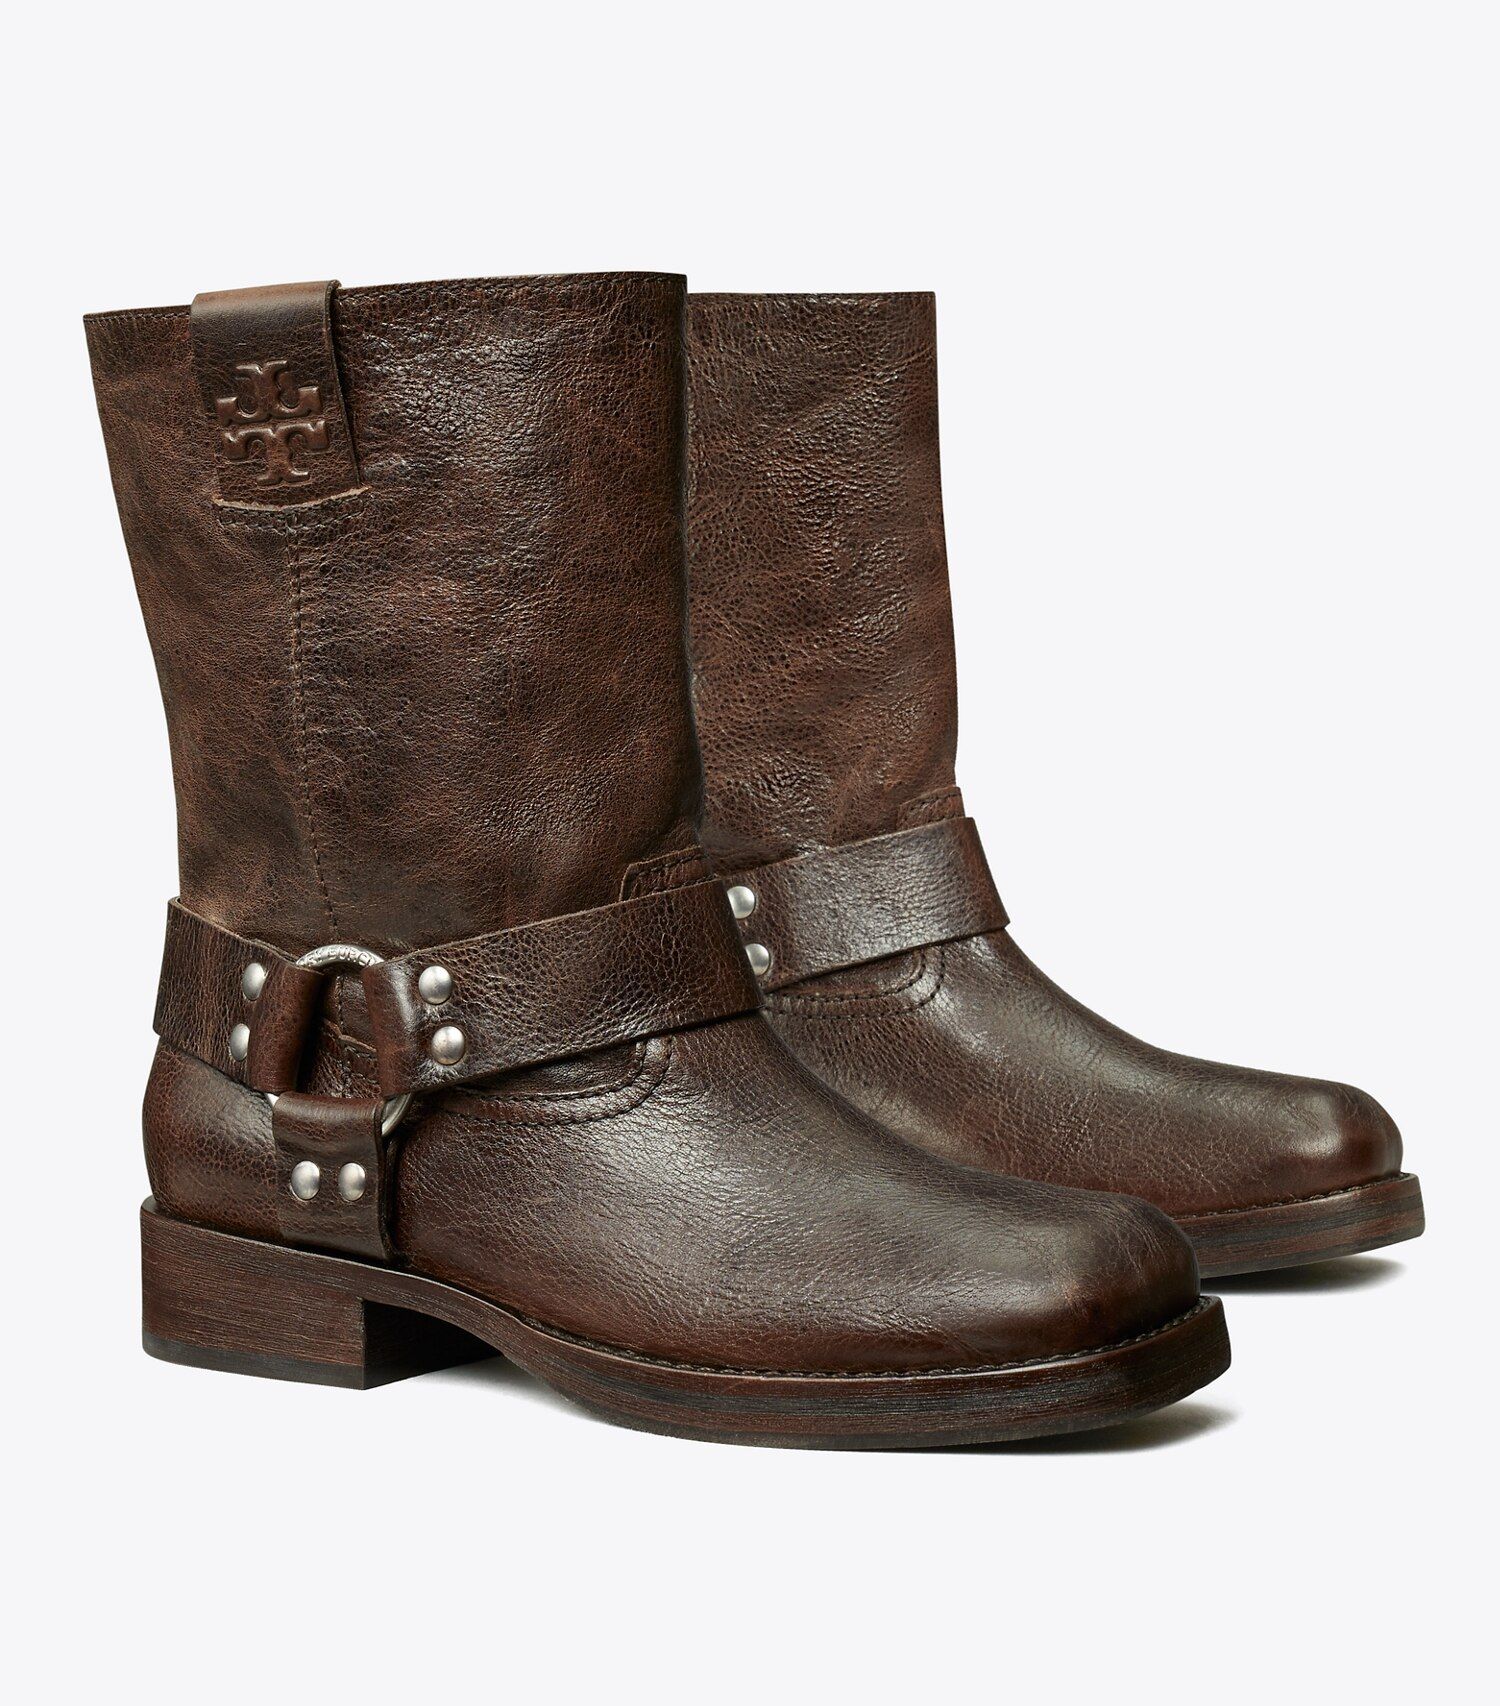 Double T Moto Boot: Women's Designer Ankle Boots | Tory Burch | Tory Burch (US)